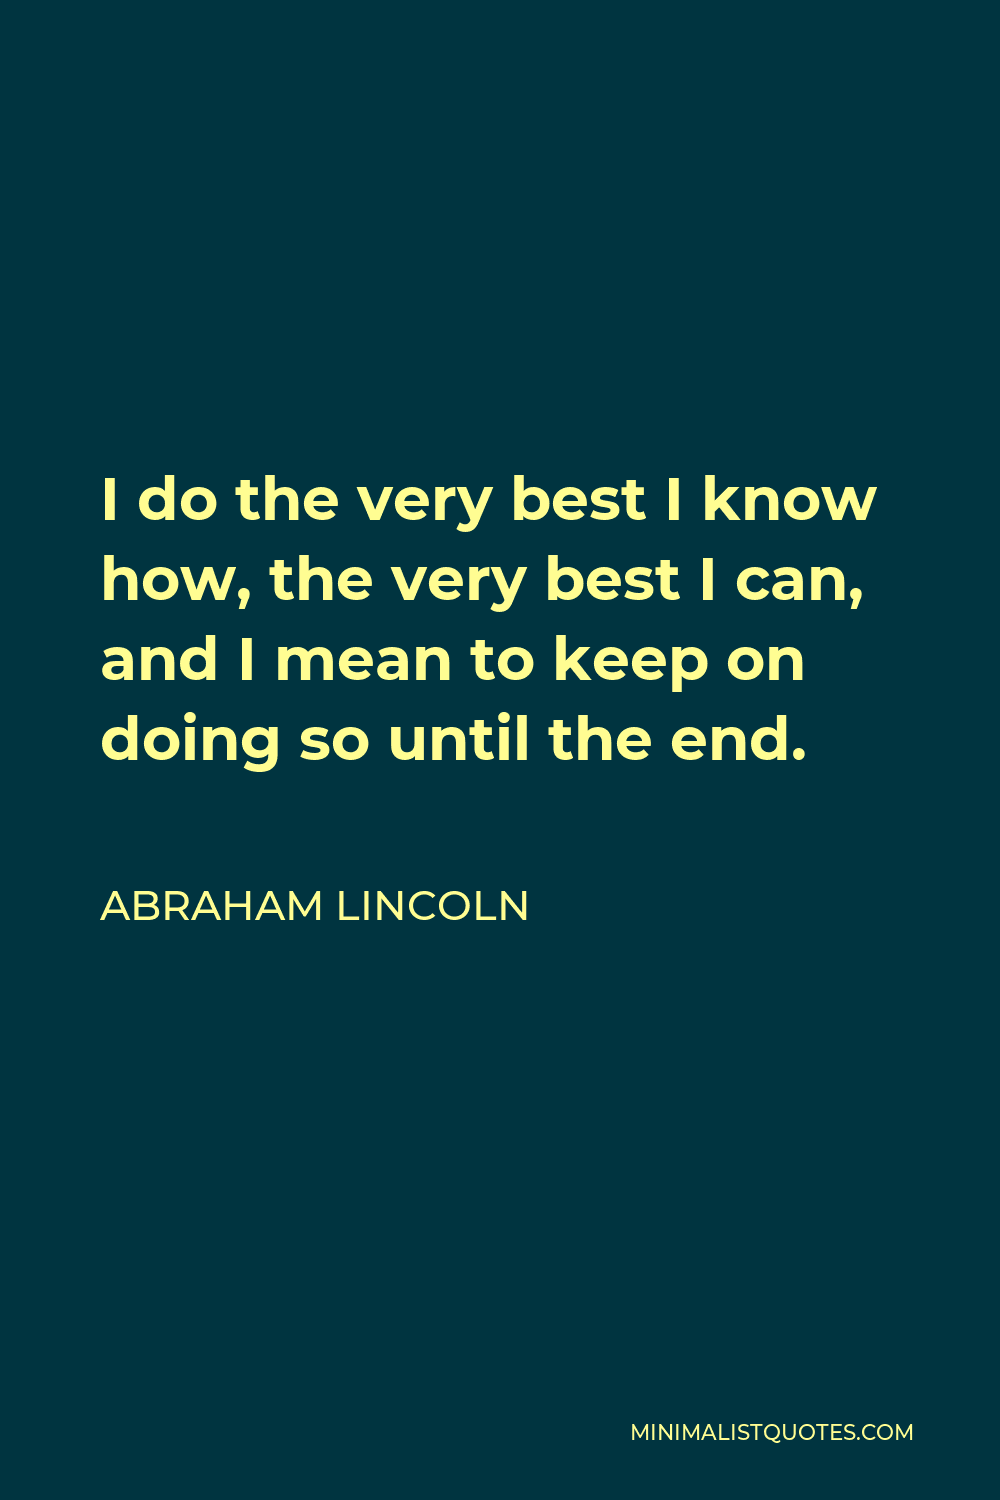 Abraham Lincoln Quote - I do the very best I know how, the very best I can, and I mean to keep on doing so until the end.